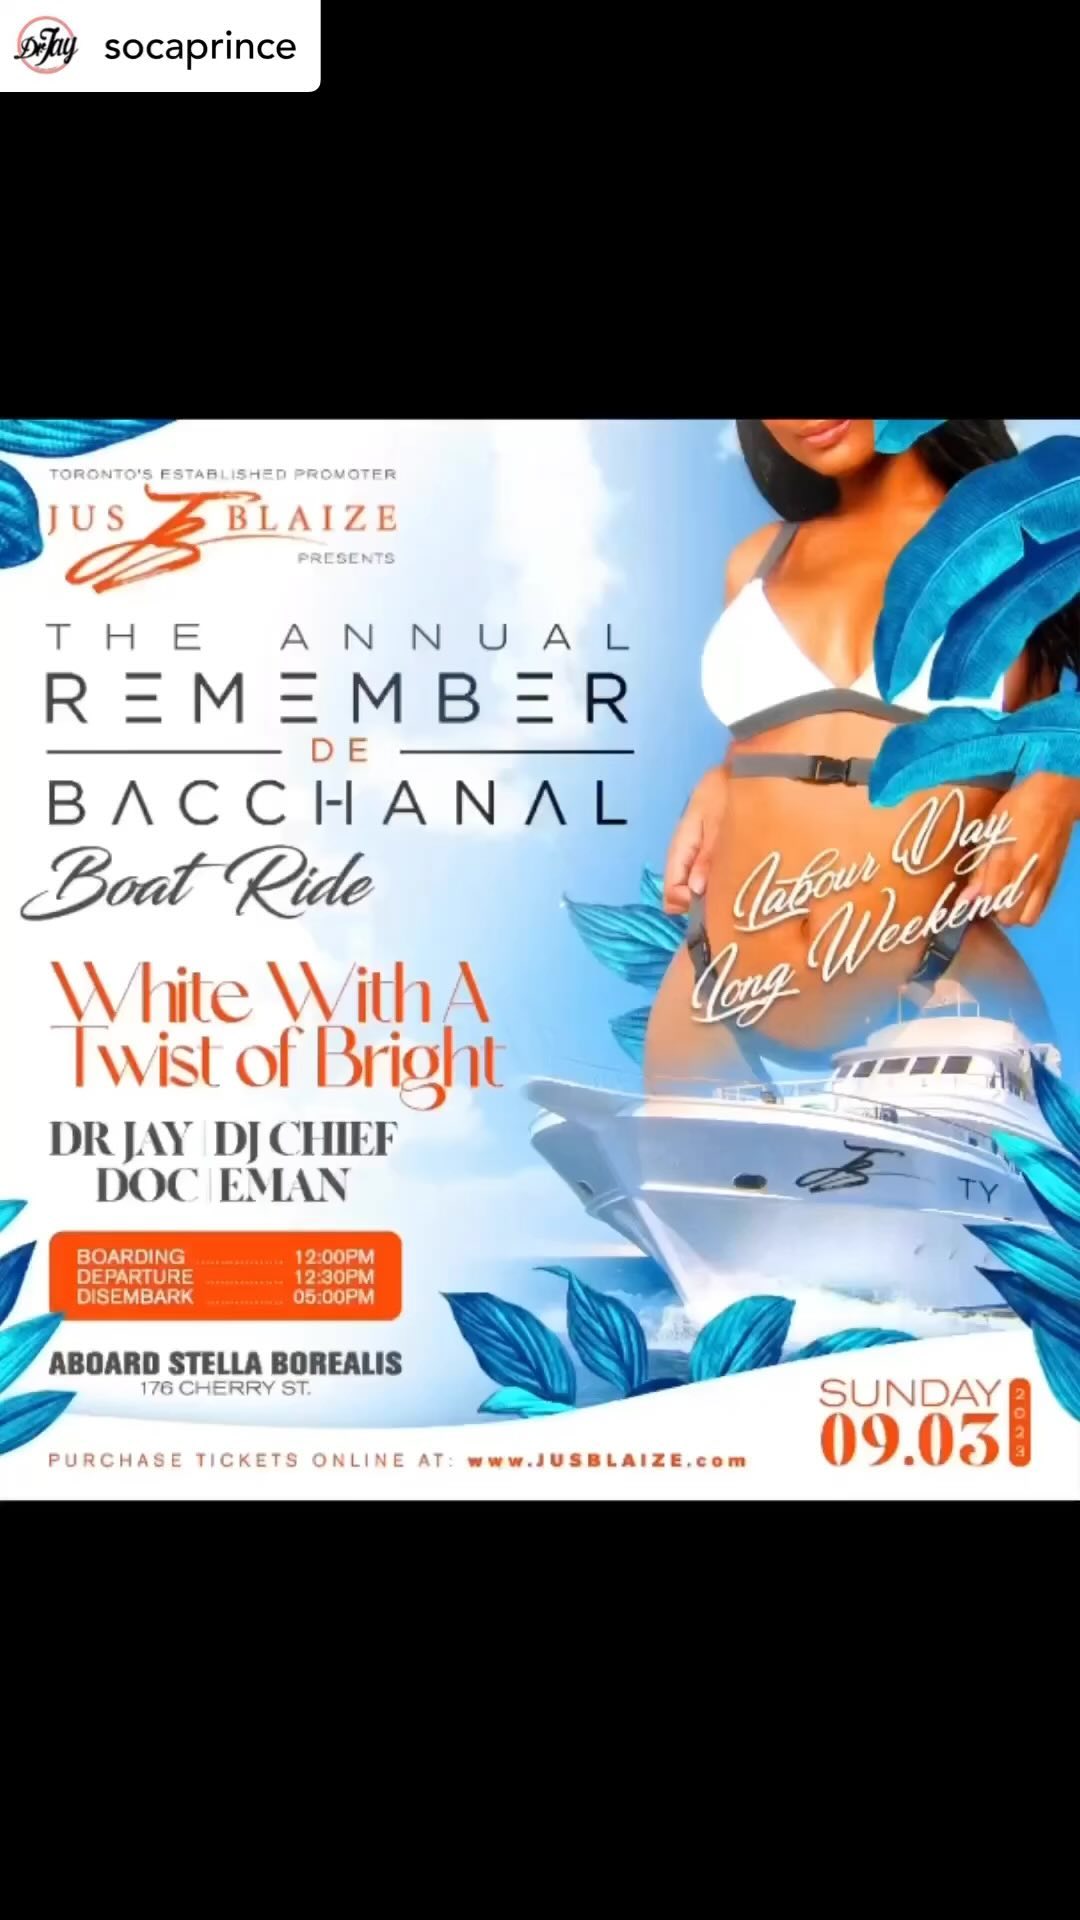 WHITE w/ A Twist of BRIGHT On De 
BACCHANAL BOAT RIDE!
.
𝑺𝑼𝑵𝑫𝑨𝒀 𝑺𝑬𝑷𝑻 3𝒓𝒅, 2023 (12-5pm)
𝙍𝙀𝙈𝙀𝙈𝘽𝙀𝙍 𝘿𝙀 𝘽𝘼𝘾𝘾𝙃𝘼𝙉𝘼𝙇 
𝐿𝐴𝐵𝑂𝑈𝑅 𝐷𝐴𝑌 𝑆𝑈𝑁𝐷𝐴𝑌 𝐵𝑂𝐴𝑇 𝑅𝐼𝐷𝐸

Wear 𝙒𝙃𝙄𝙏𝙀 and Be 𝘽𝙍𝙄𝙂𝙃𝙏 with it!
Aboard The STELLA BOREALIS!!

Ft. An ALL-STAR CAST LABOUR DAY SUNDAY
DR JAY @socaprince
DJ CHIEF @djchiefera
DOC @dejaydoc
EMAN @emanfromthenewkos
Hosted By: JUS BLAIZE

LTD EARLY BIRD TICKETS ON SALE NOW!!!
Purchase Tickets Safely Online At:
www.JUSBLAIZE.com